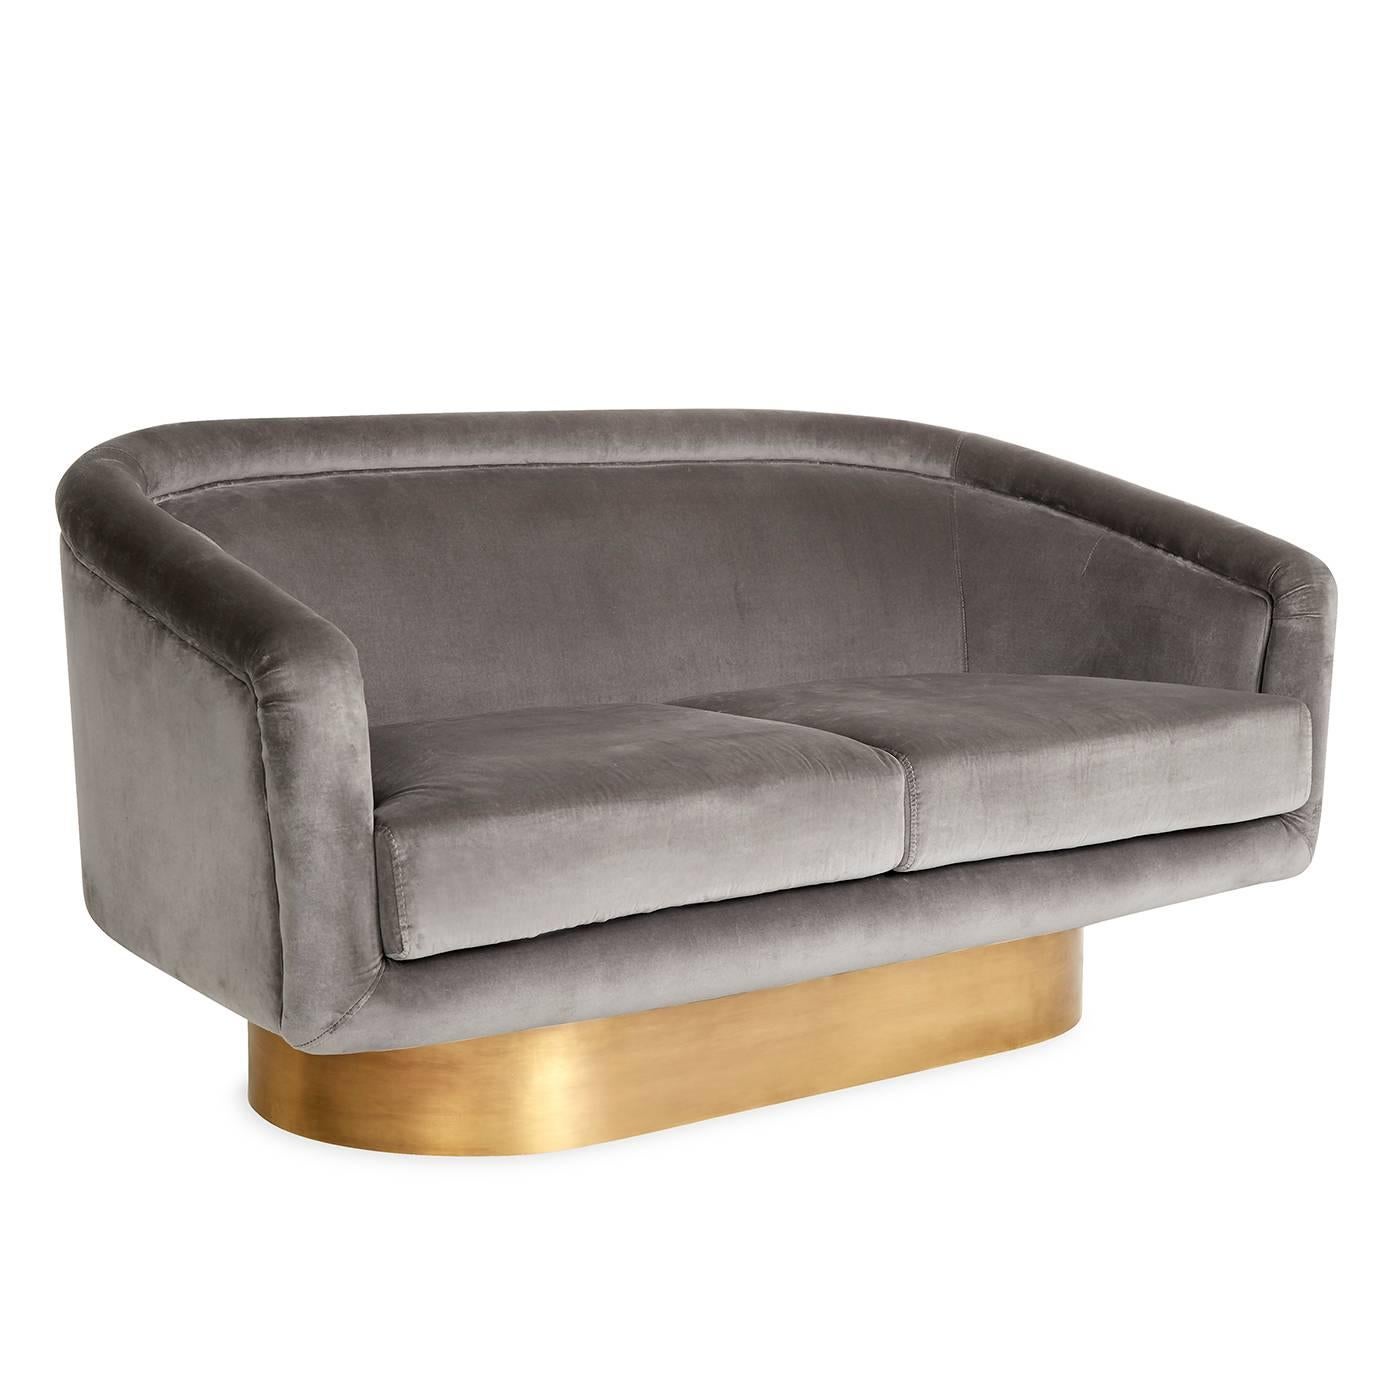 Louche glamour. Think Halston, think studio 54, think sybaritic style. But also think cozy, comfy settee. This petite sofa is fab in a foyer, at the foot of the bed or in a bedroom. The sleek and futuristic seat is upholstered in luxe Rialto Ash